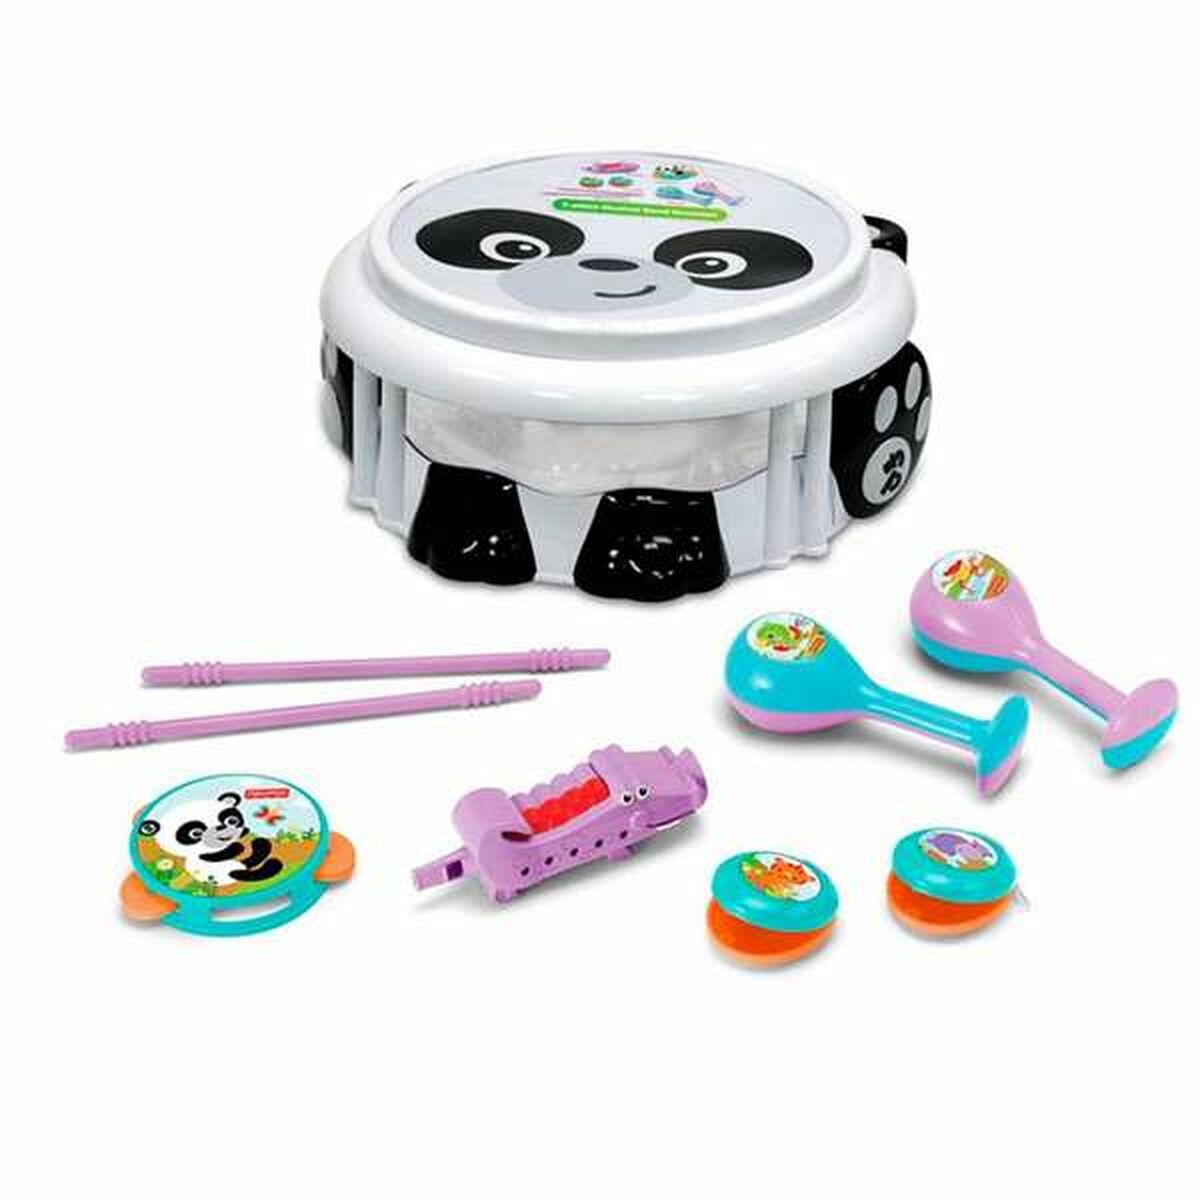 Set of toy musical instruments Reig Plastic Panda bear 9 Pieces